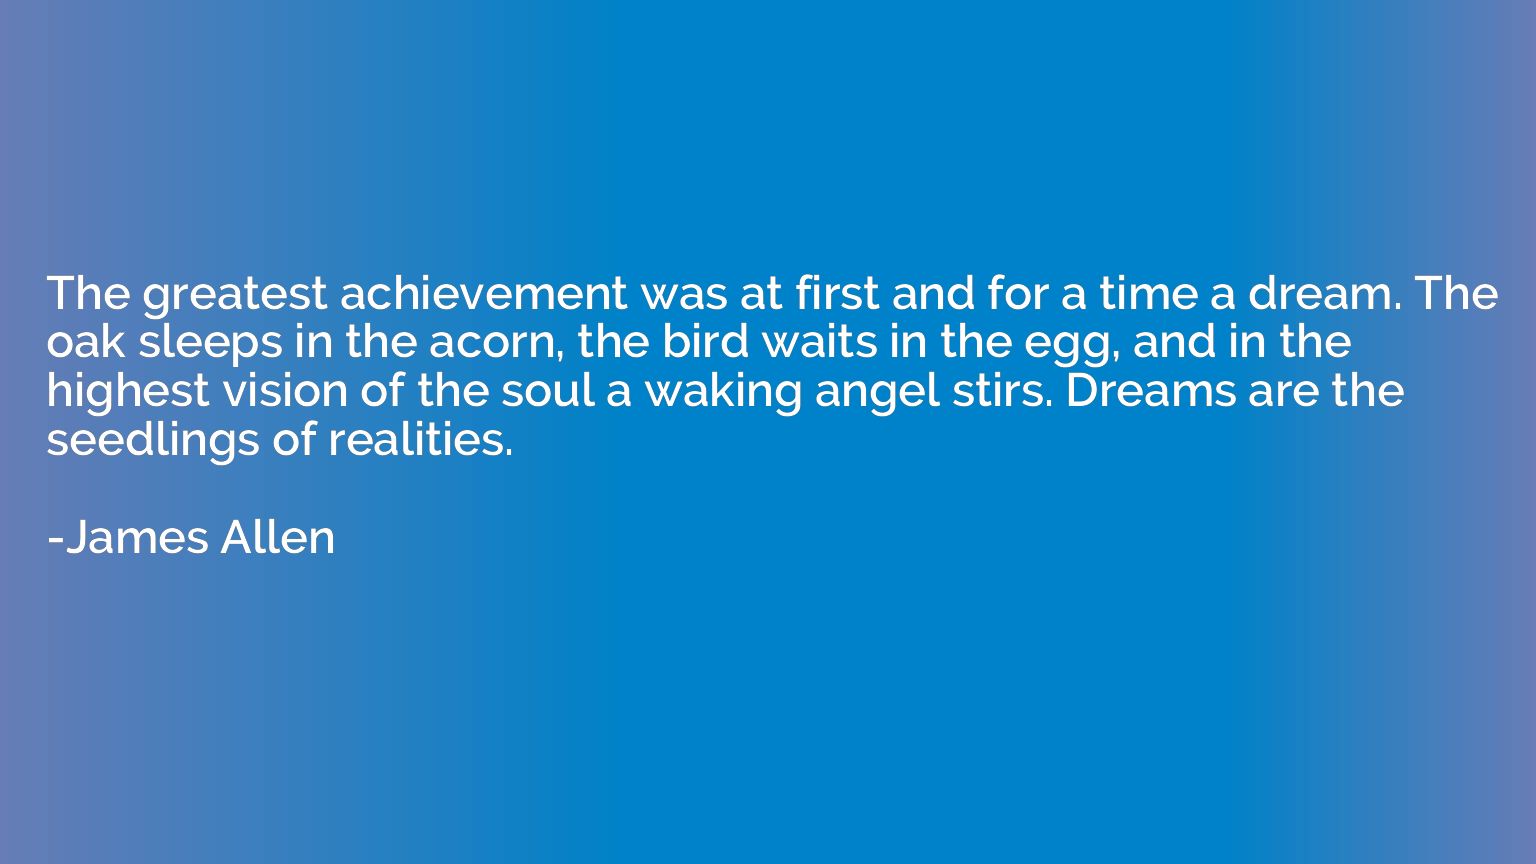 The greatest achievement was at first and for a time a dream